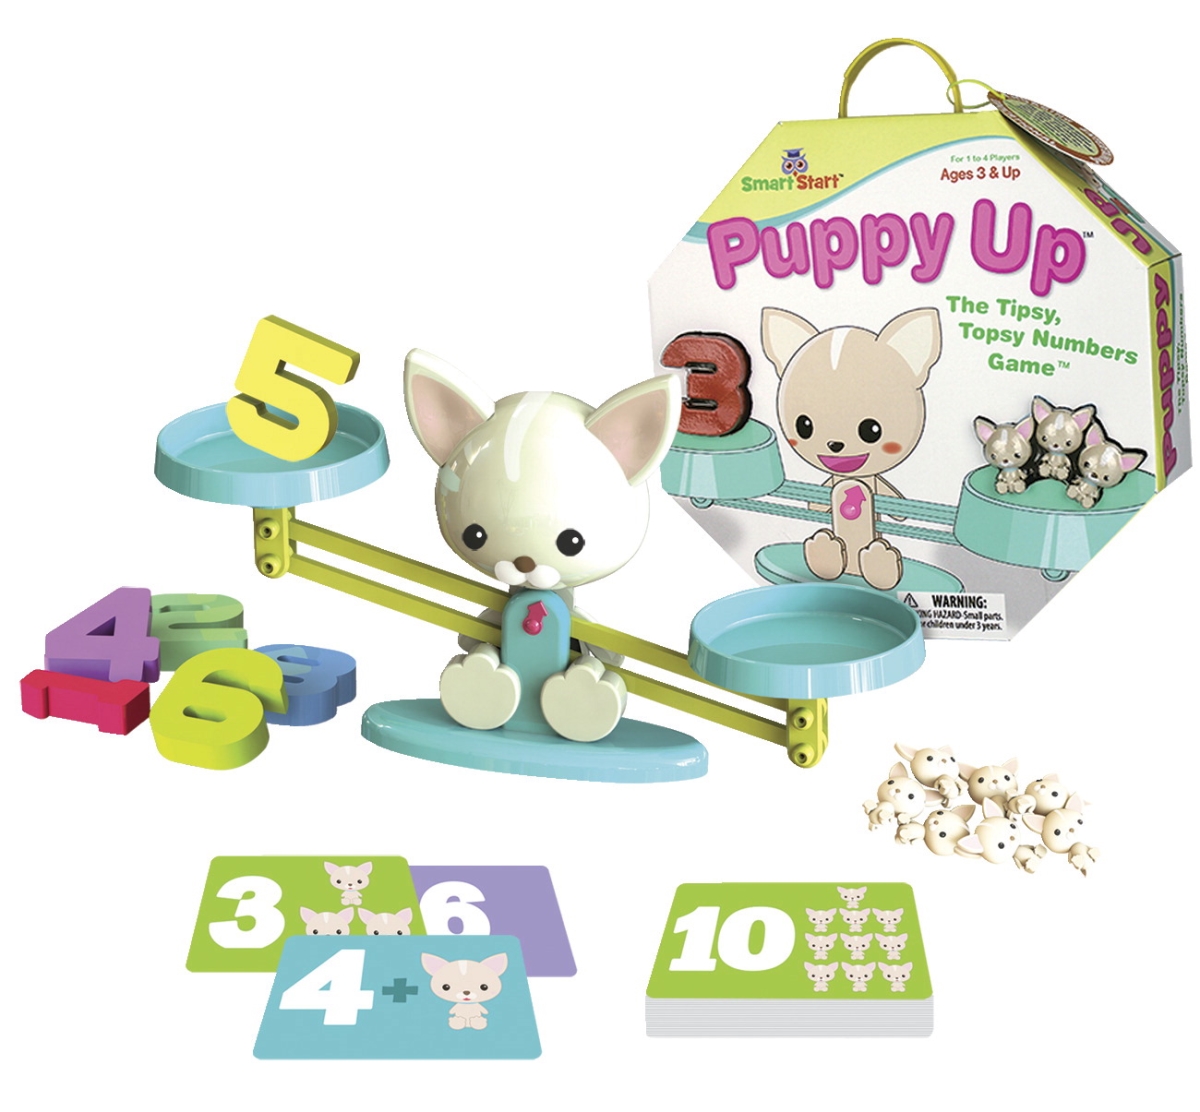 1545009 Puppy Up Game, Ages 3 & Up